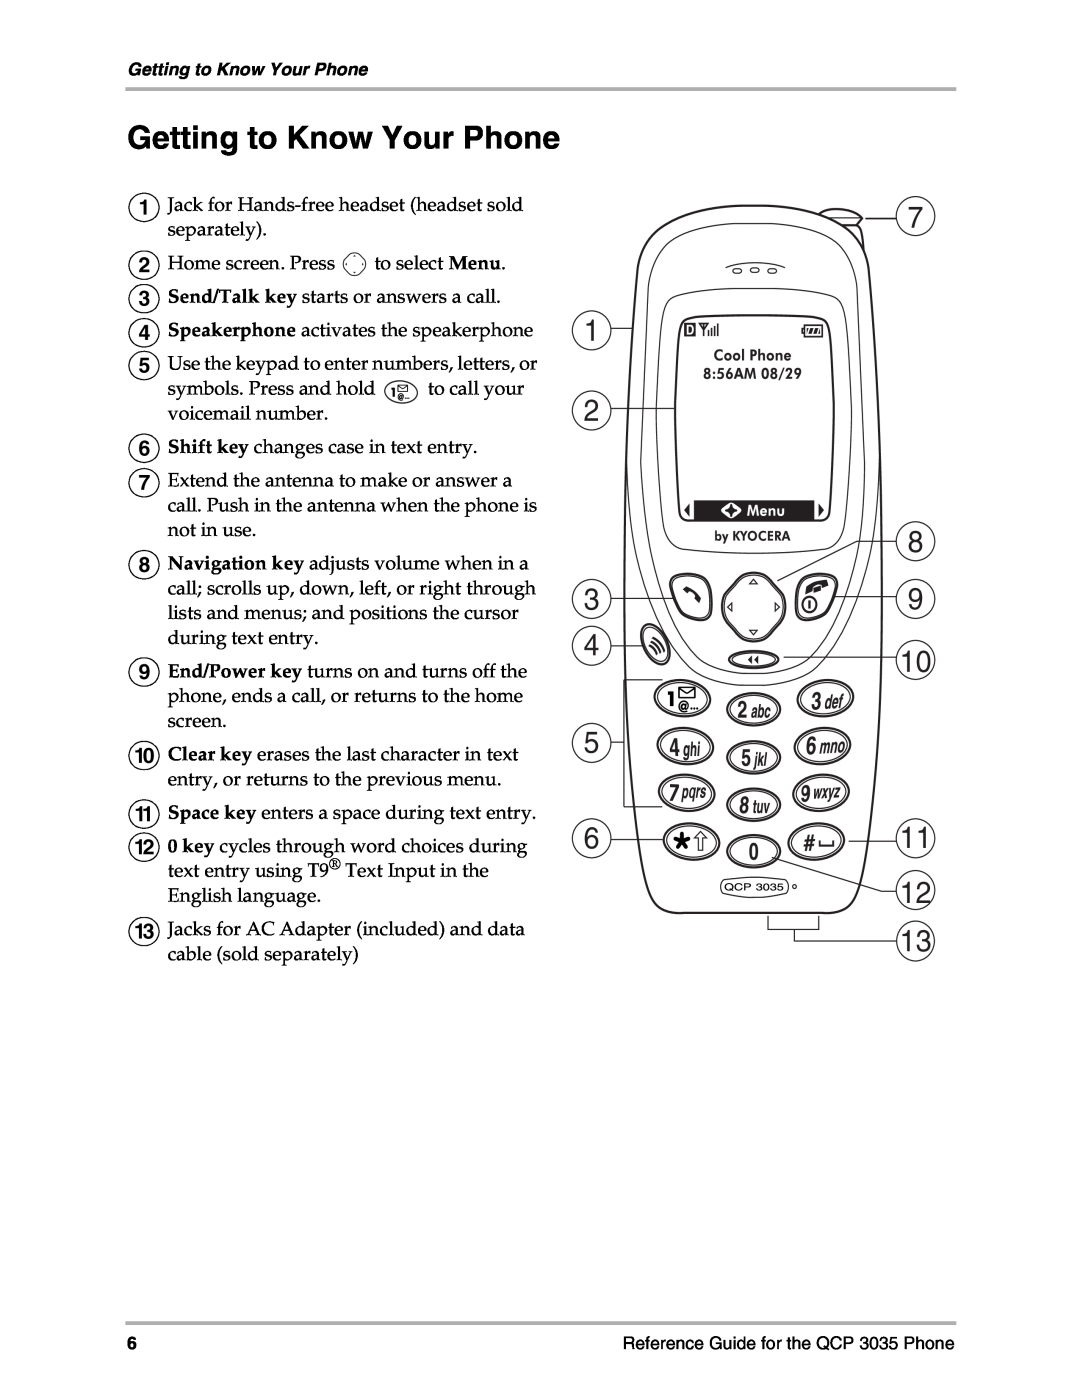 Kyocera 3035 manual Getting to Know Your Phone 